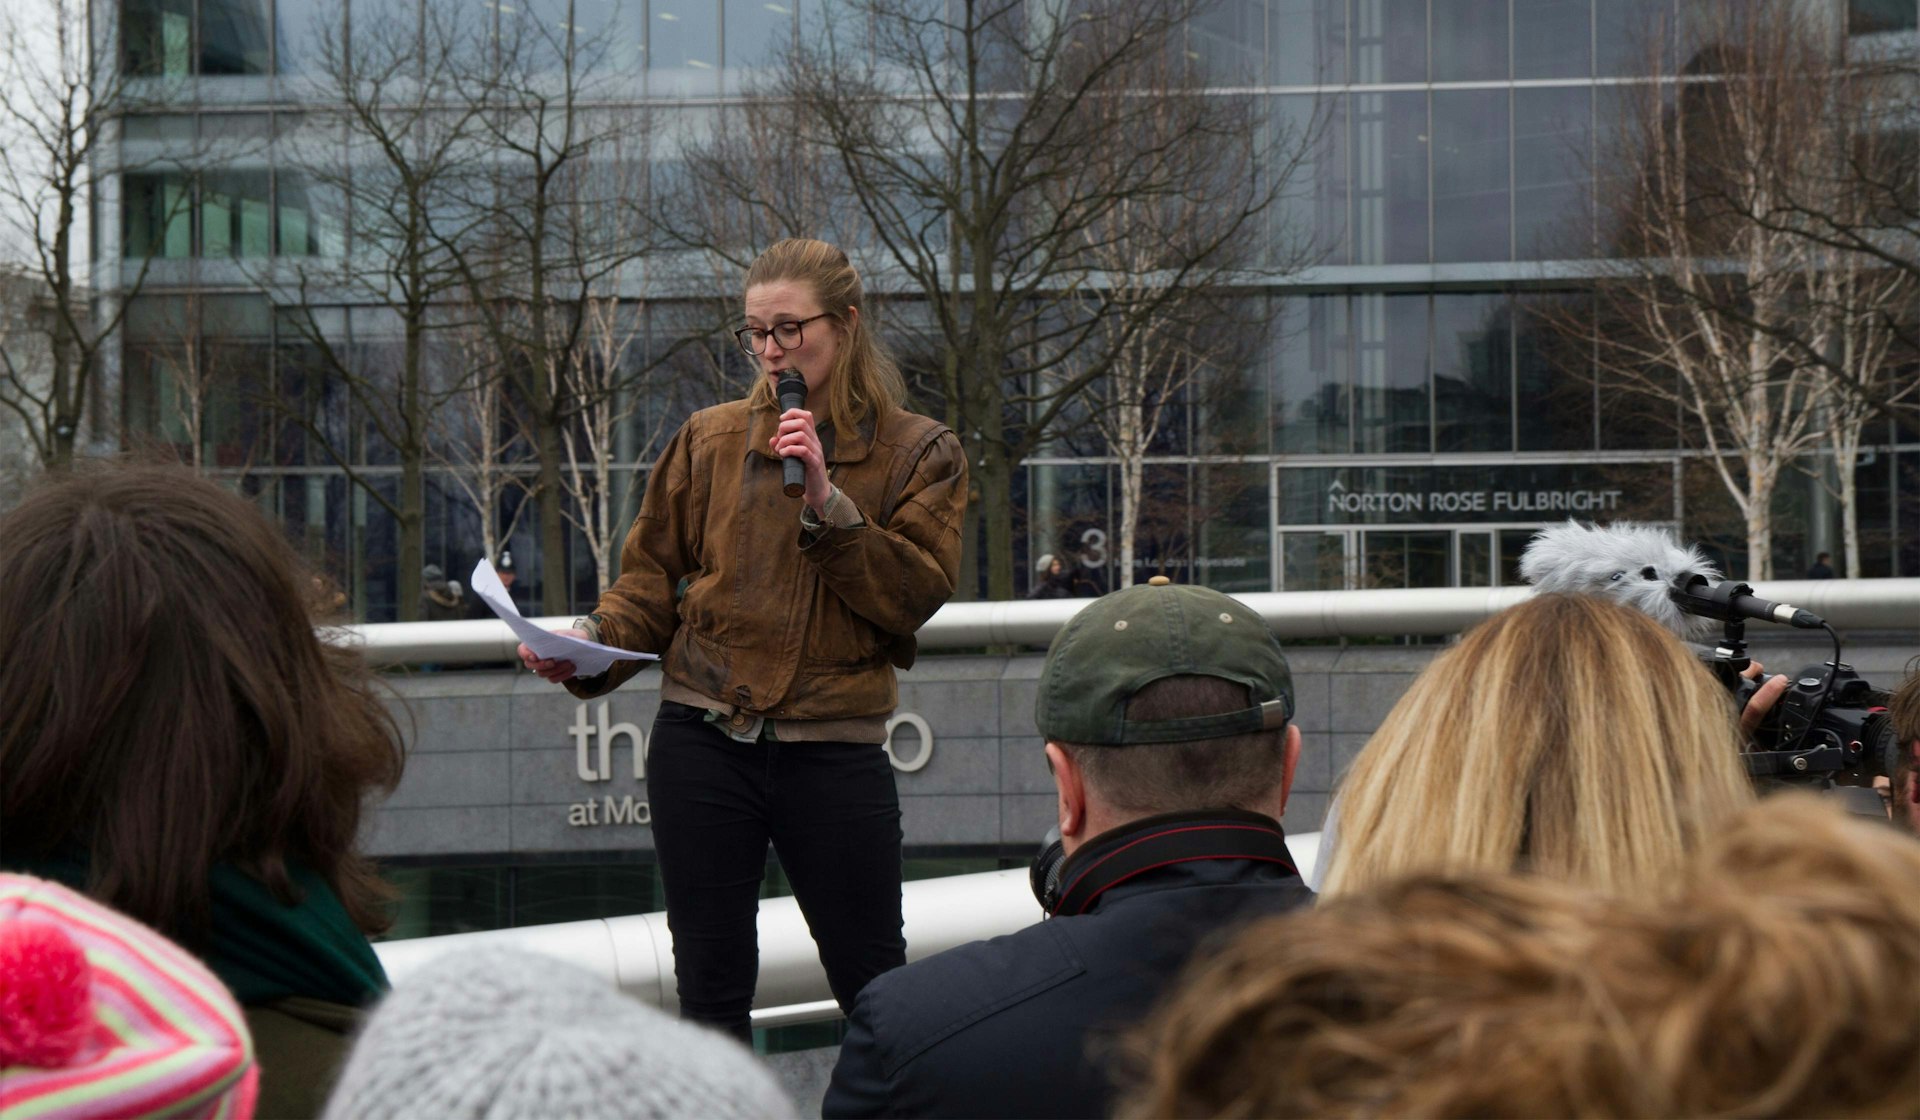 Rebecca Newsom, from Fossil Free SOAS and Divest London